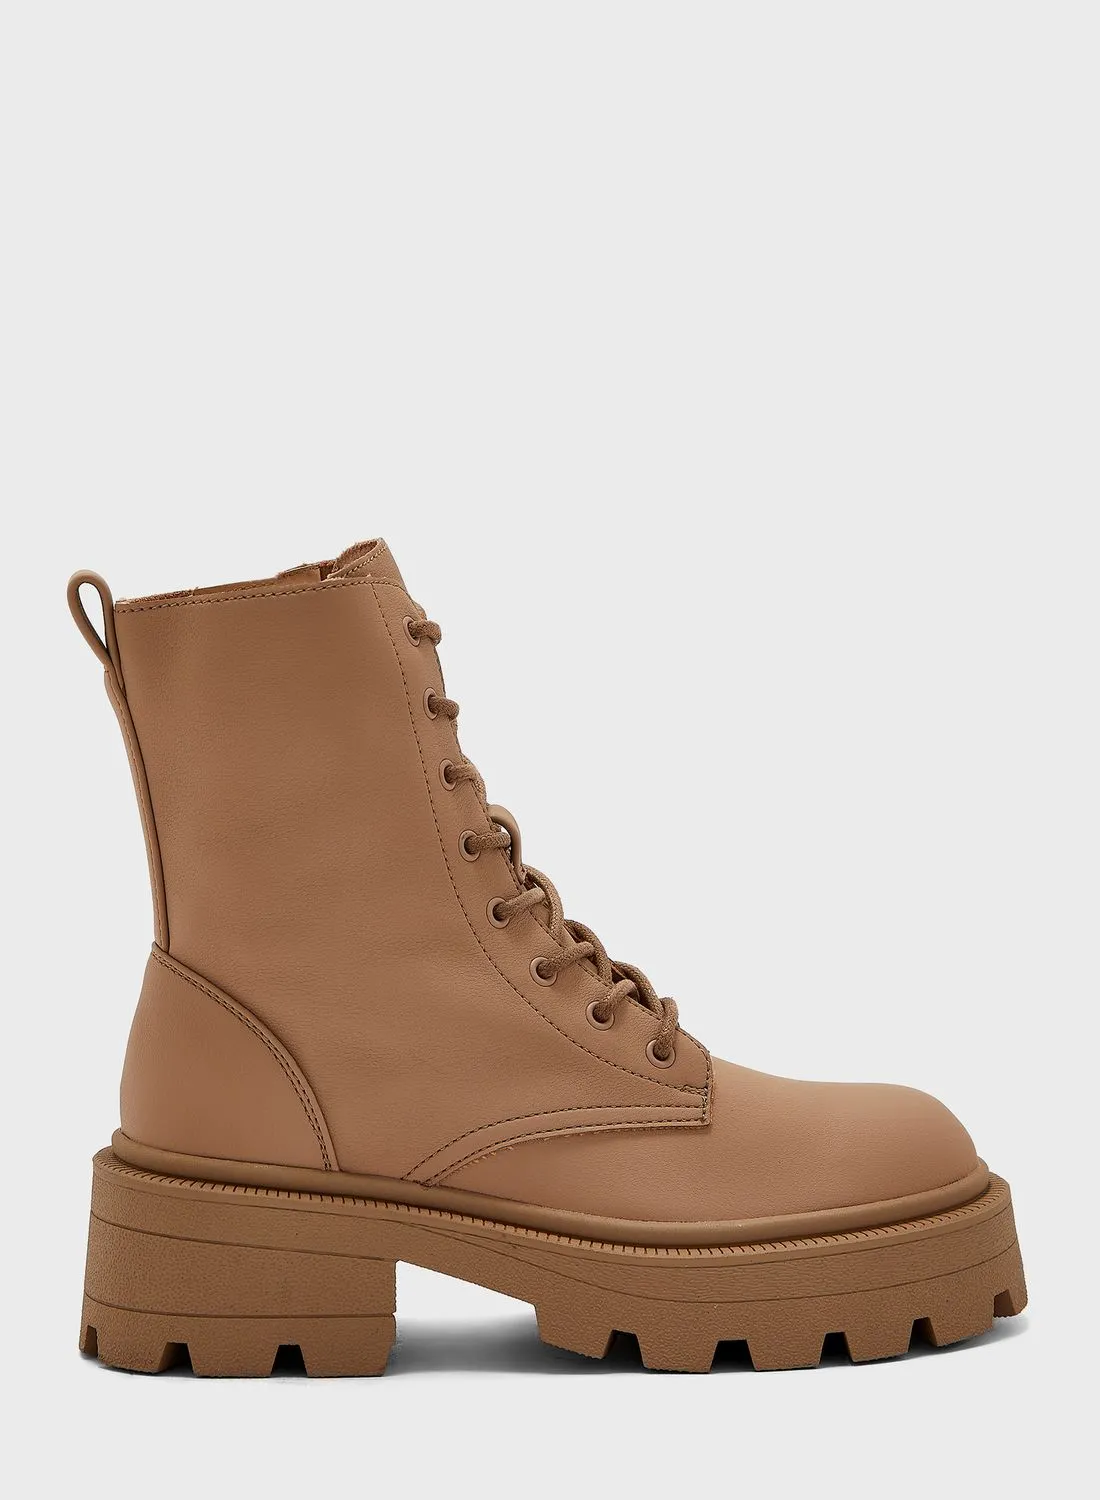 ONLY Banyu-3 Ankle Boots